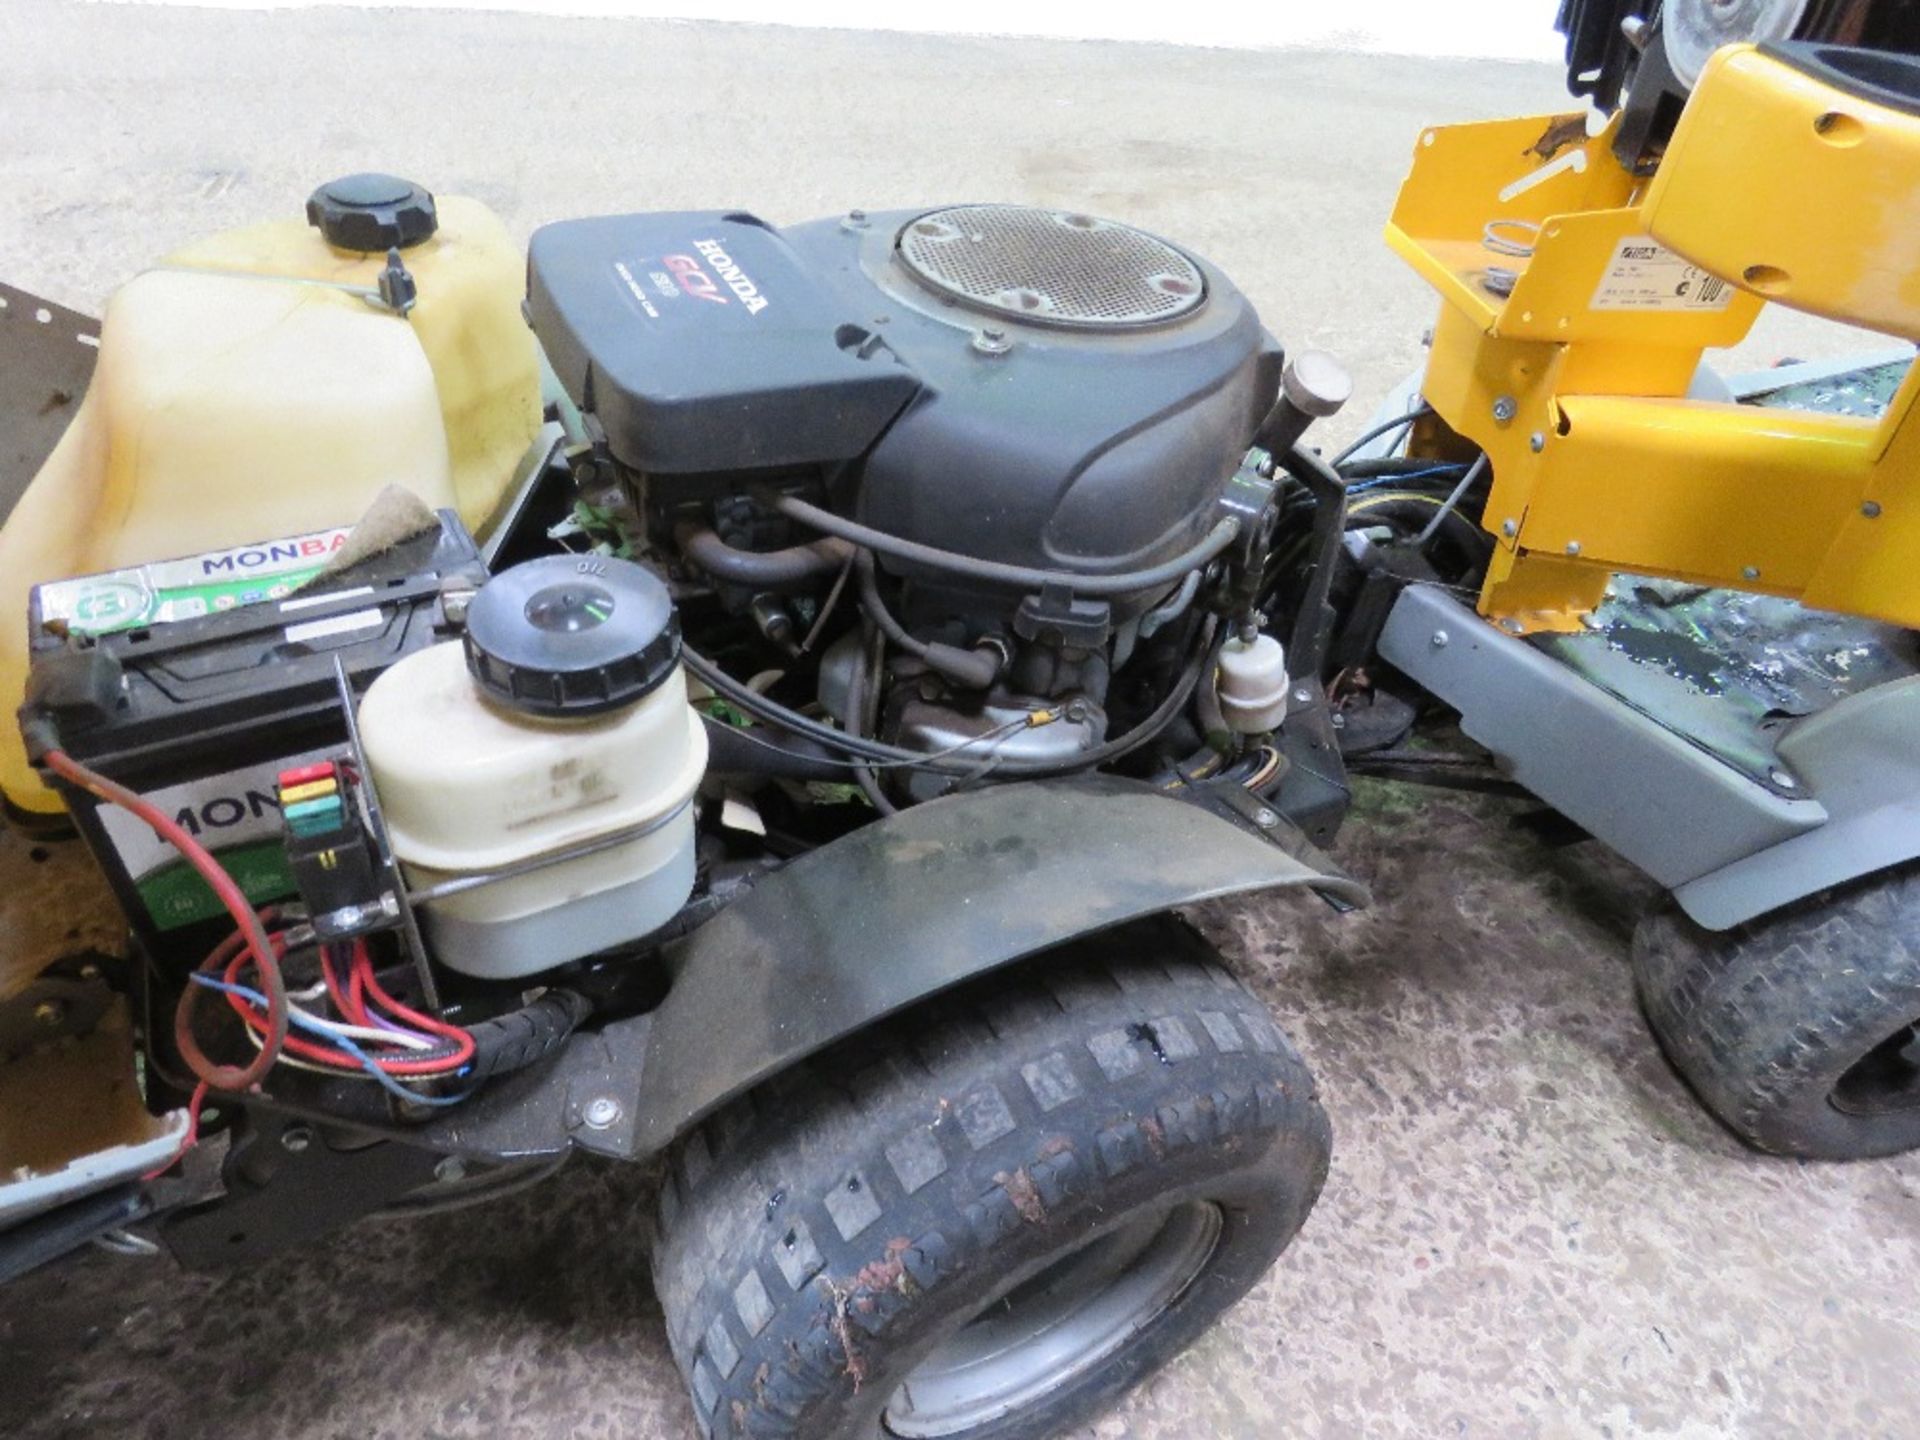 STIGA PARK ROYAL 4WD RIDE ON MOWER WITH OUTFRONT COMBIPRO 110 DECK FITTED. HONDA PETROL ENGINE. WHE - Image 11 of 12